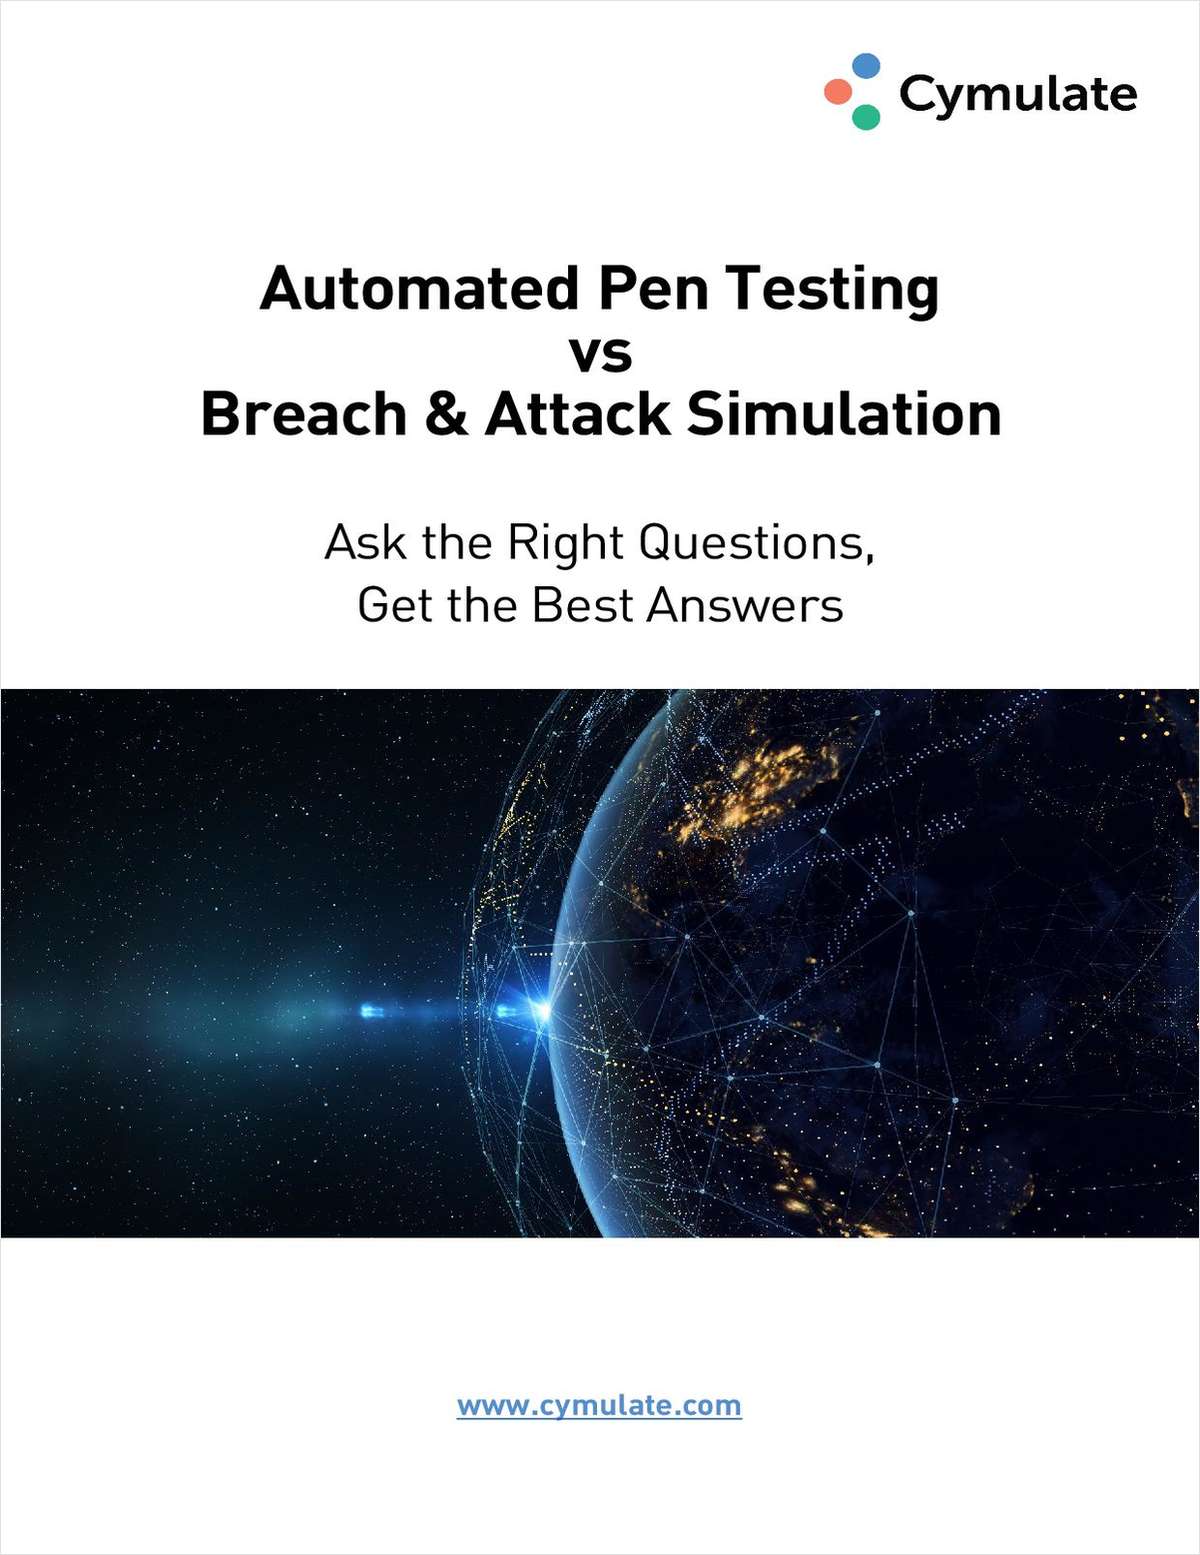 Automated Pen Testing vs Breach and Attack Simulation